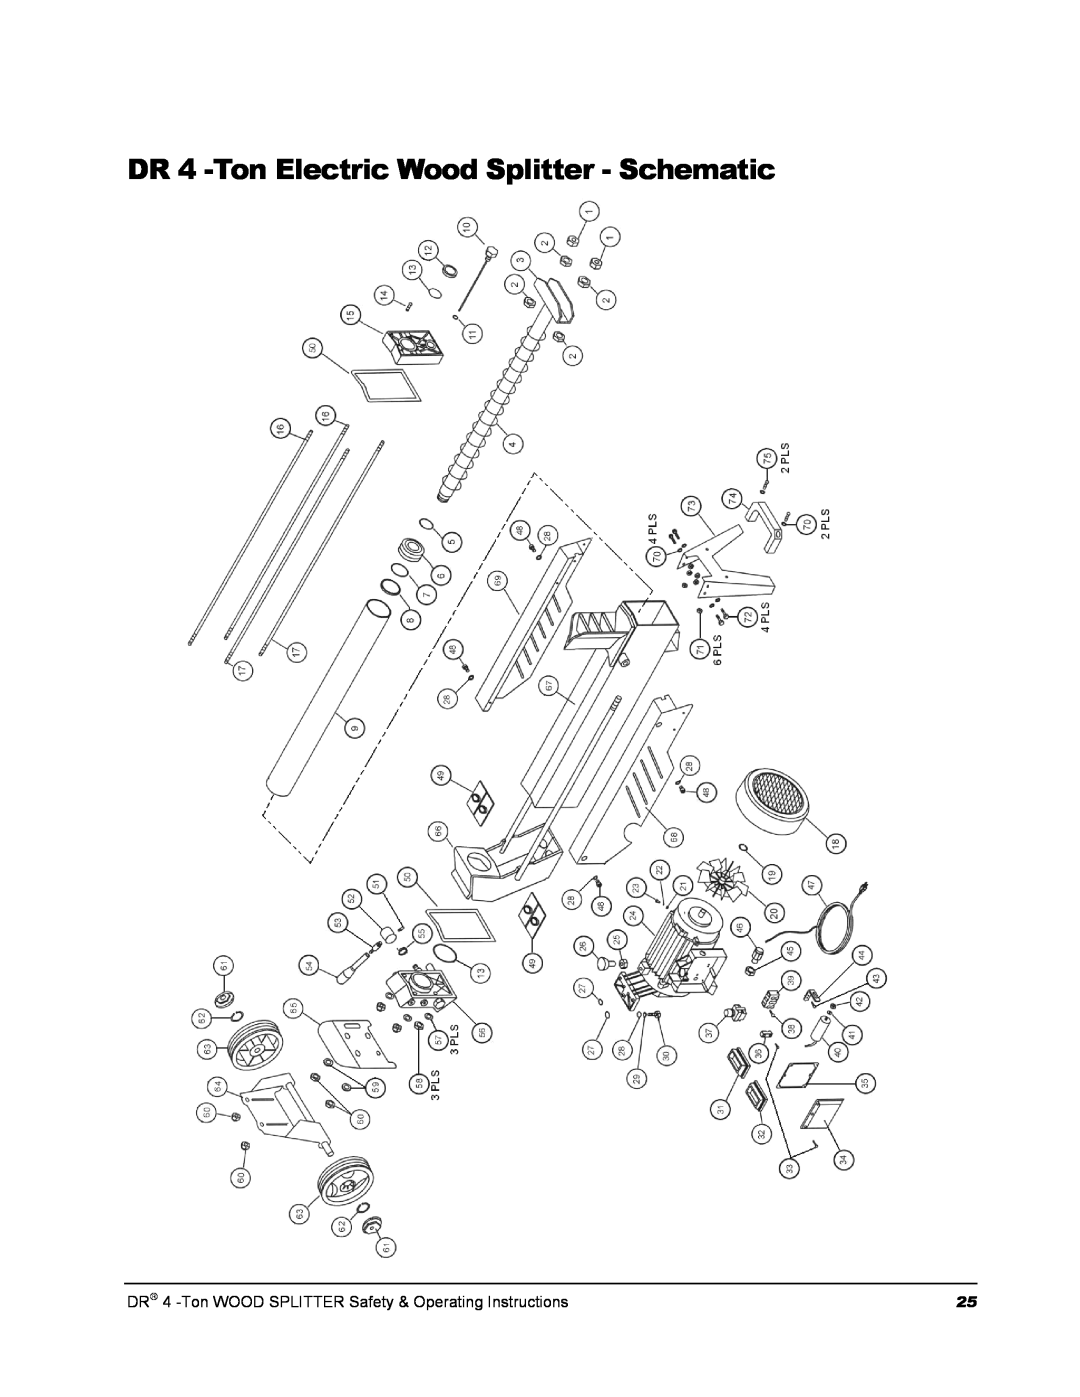 Country Home Products DR 4 -TON manual DR 4 -TonElectric Wood Splitter - Schematic 